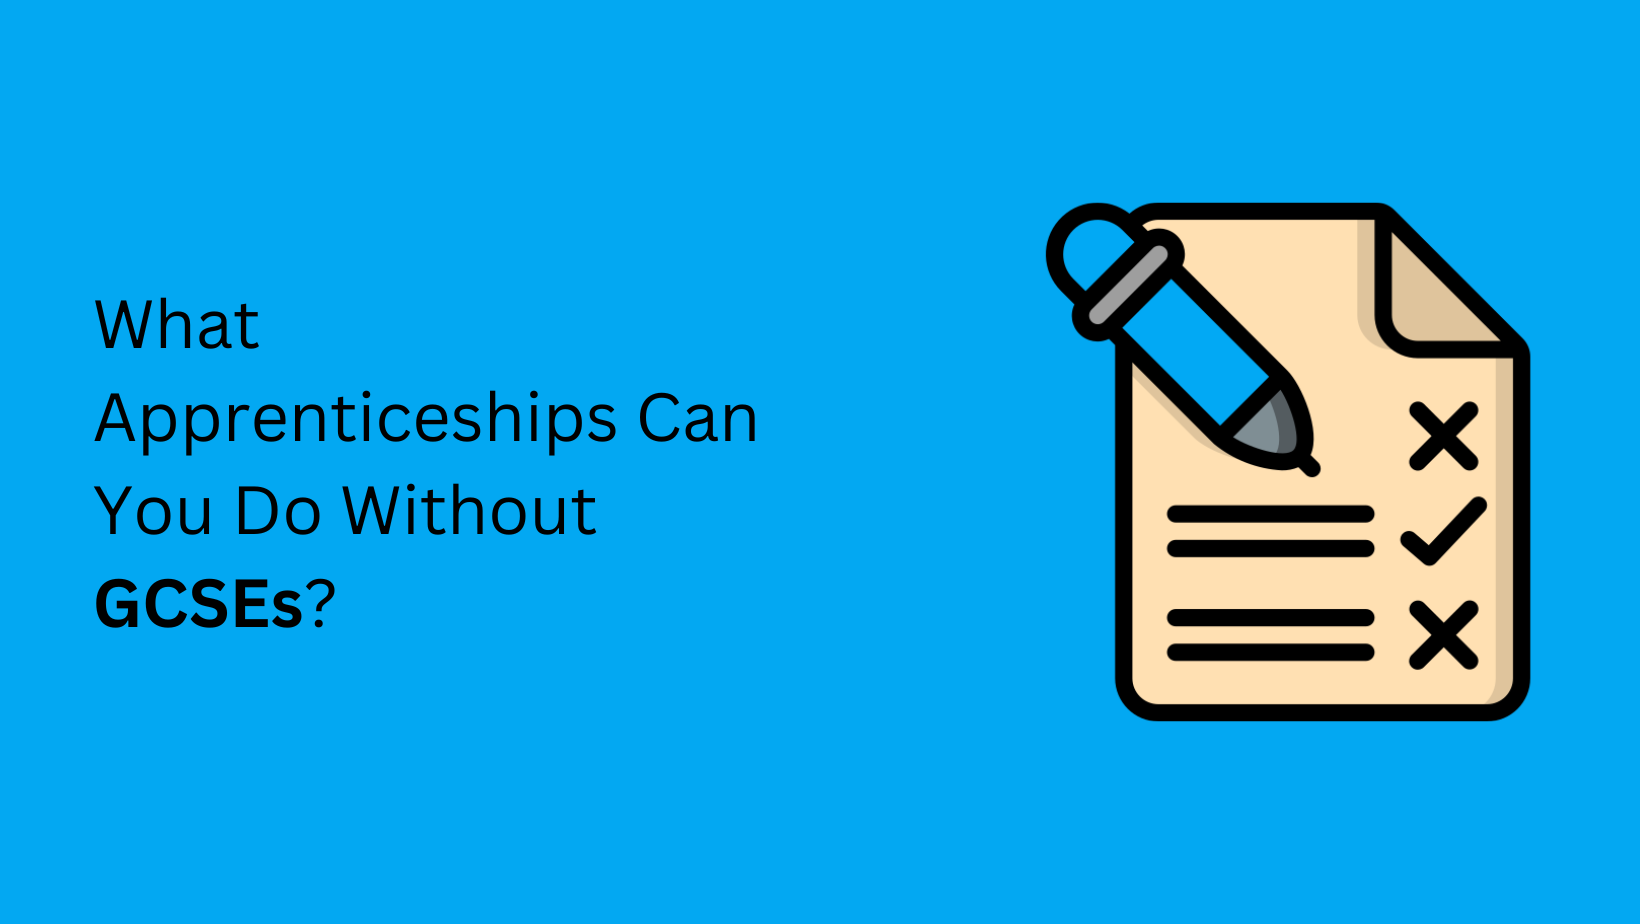 What Apprenticeships Can You Do Without GCSEs